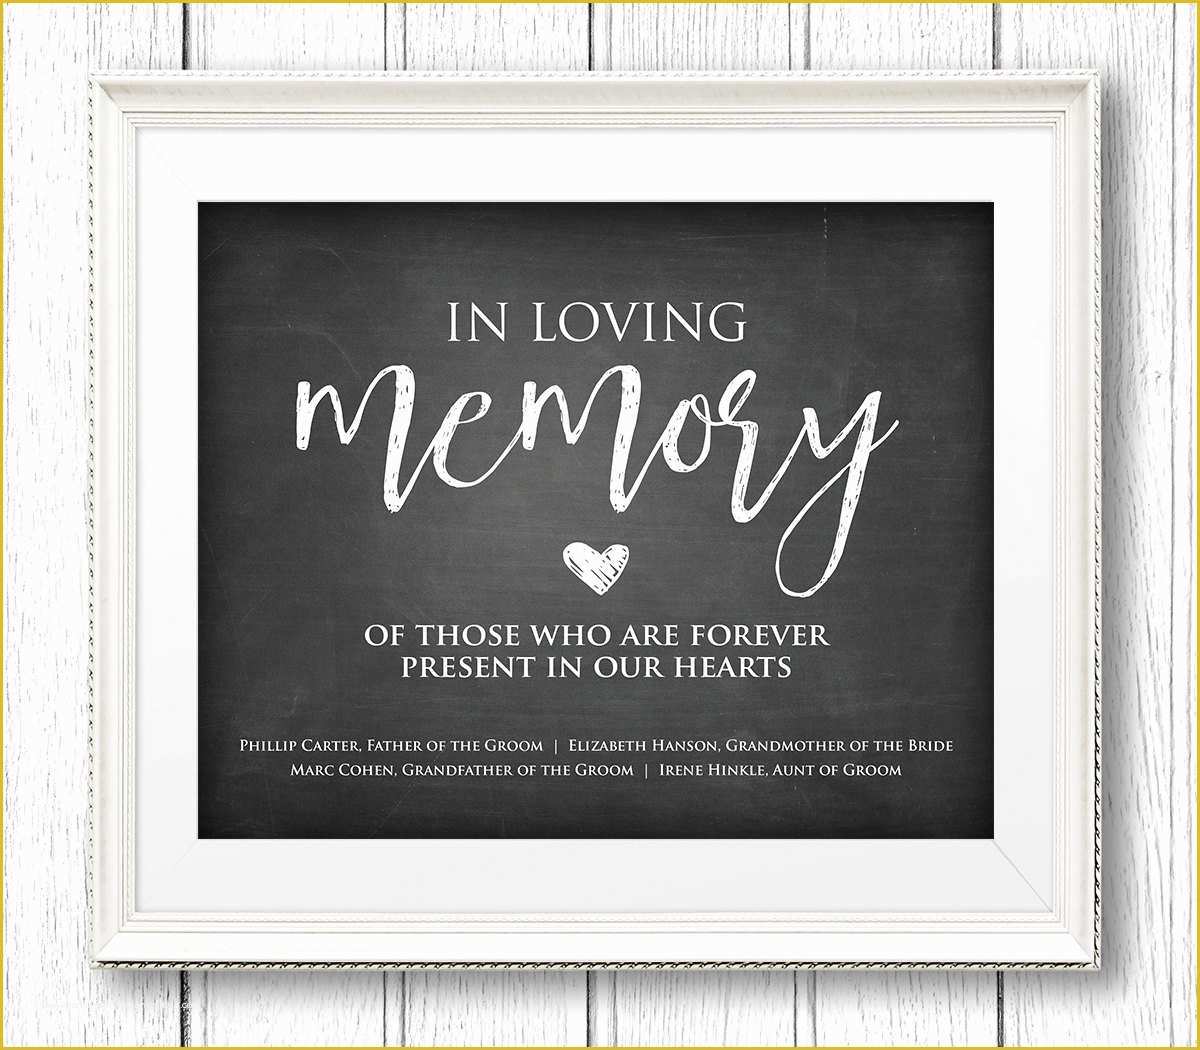 in-loving-memory-template-free-of-f-in-loving-memory-wedding-sign-template-editable